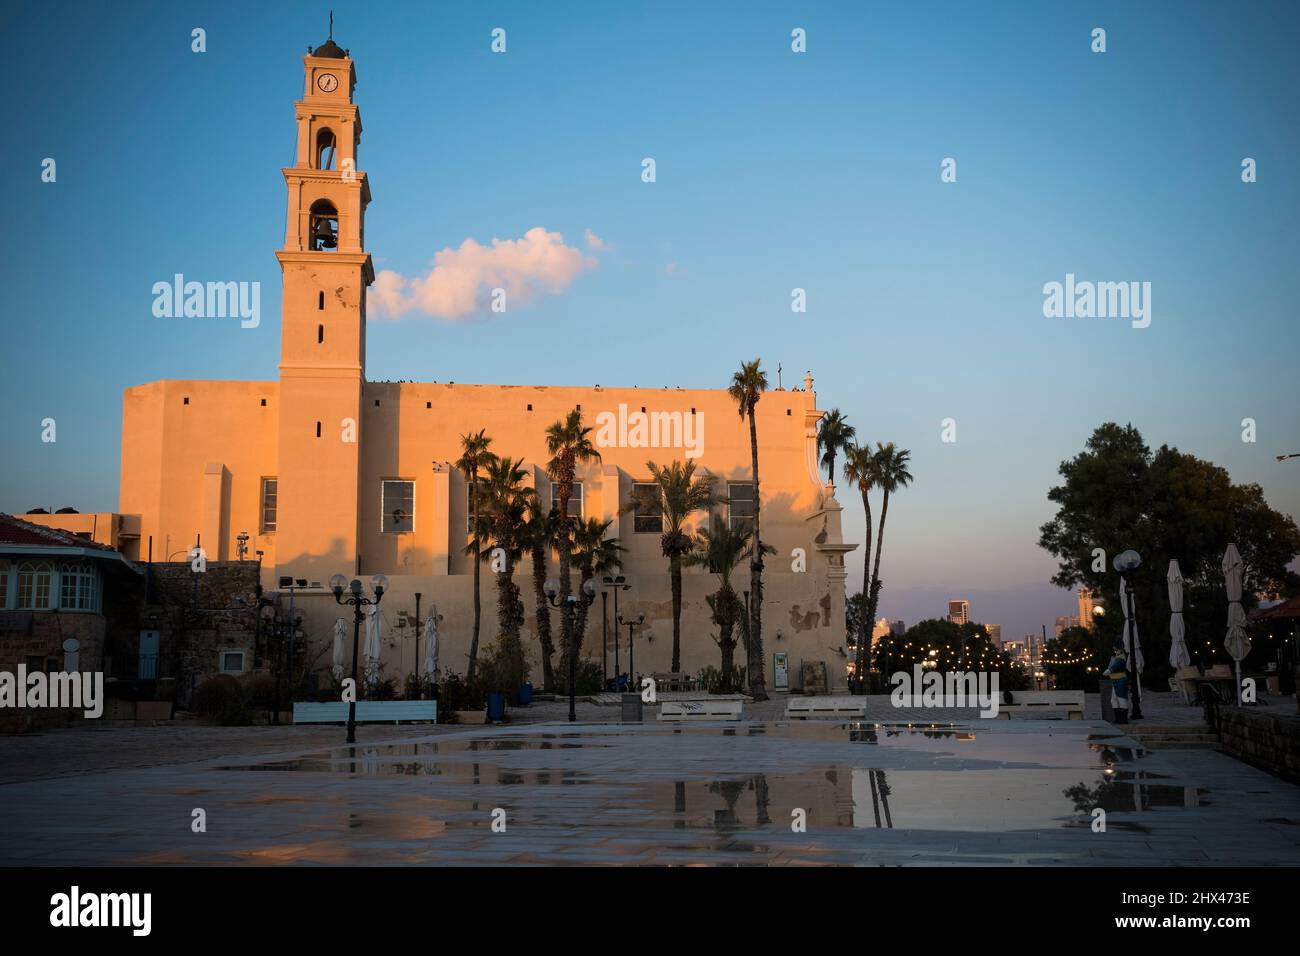 St Peter's Church in Jaffa in the old town by Tel Aviv Stock Photo